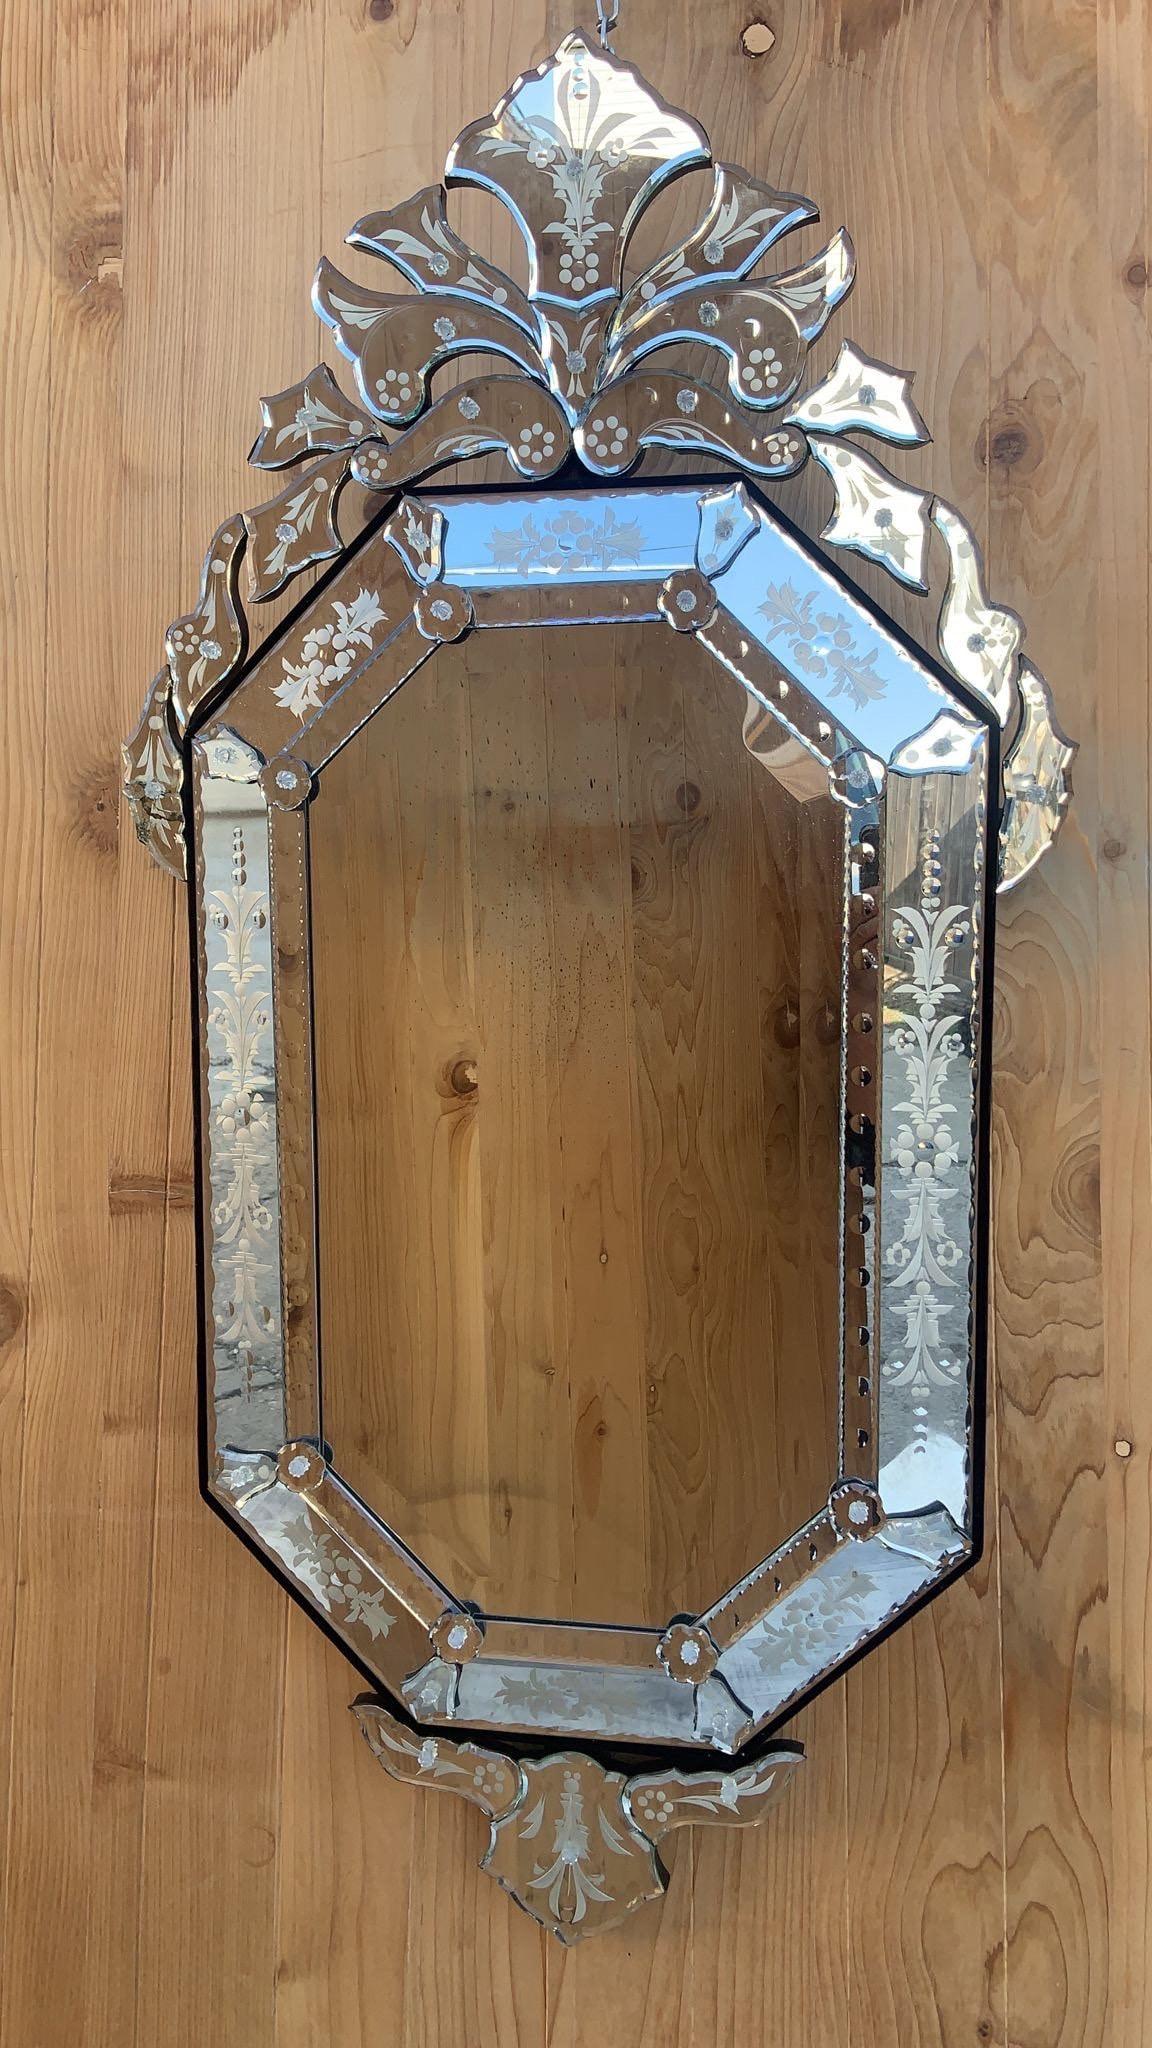 Vintage Venetian Etched Glass Wall Mirror 

A Venetian wall mirror with an elaborately detailed frame, decorated with frosted and convex floral designs.

circa 1940

Dimensions:
H: 48”
W: 21”
D: 1”.